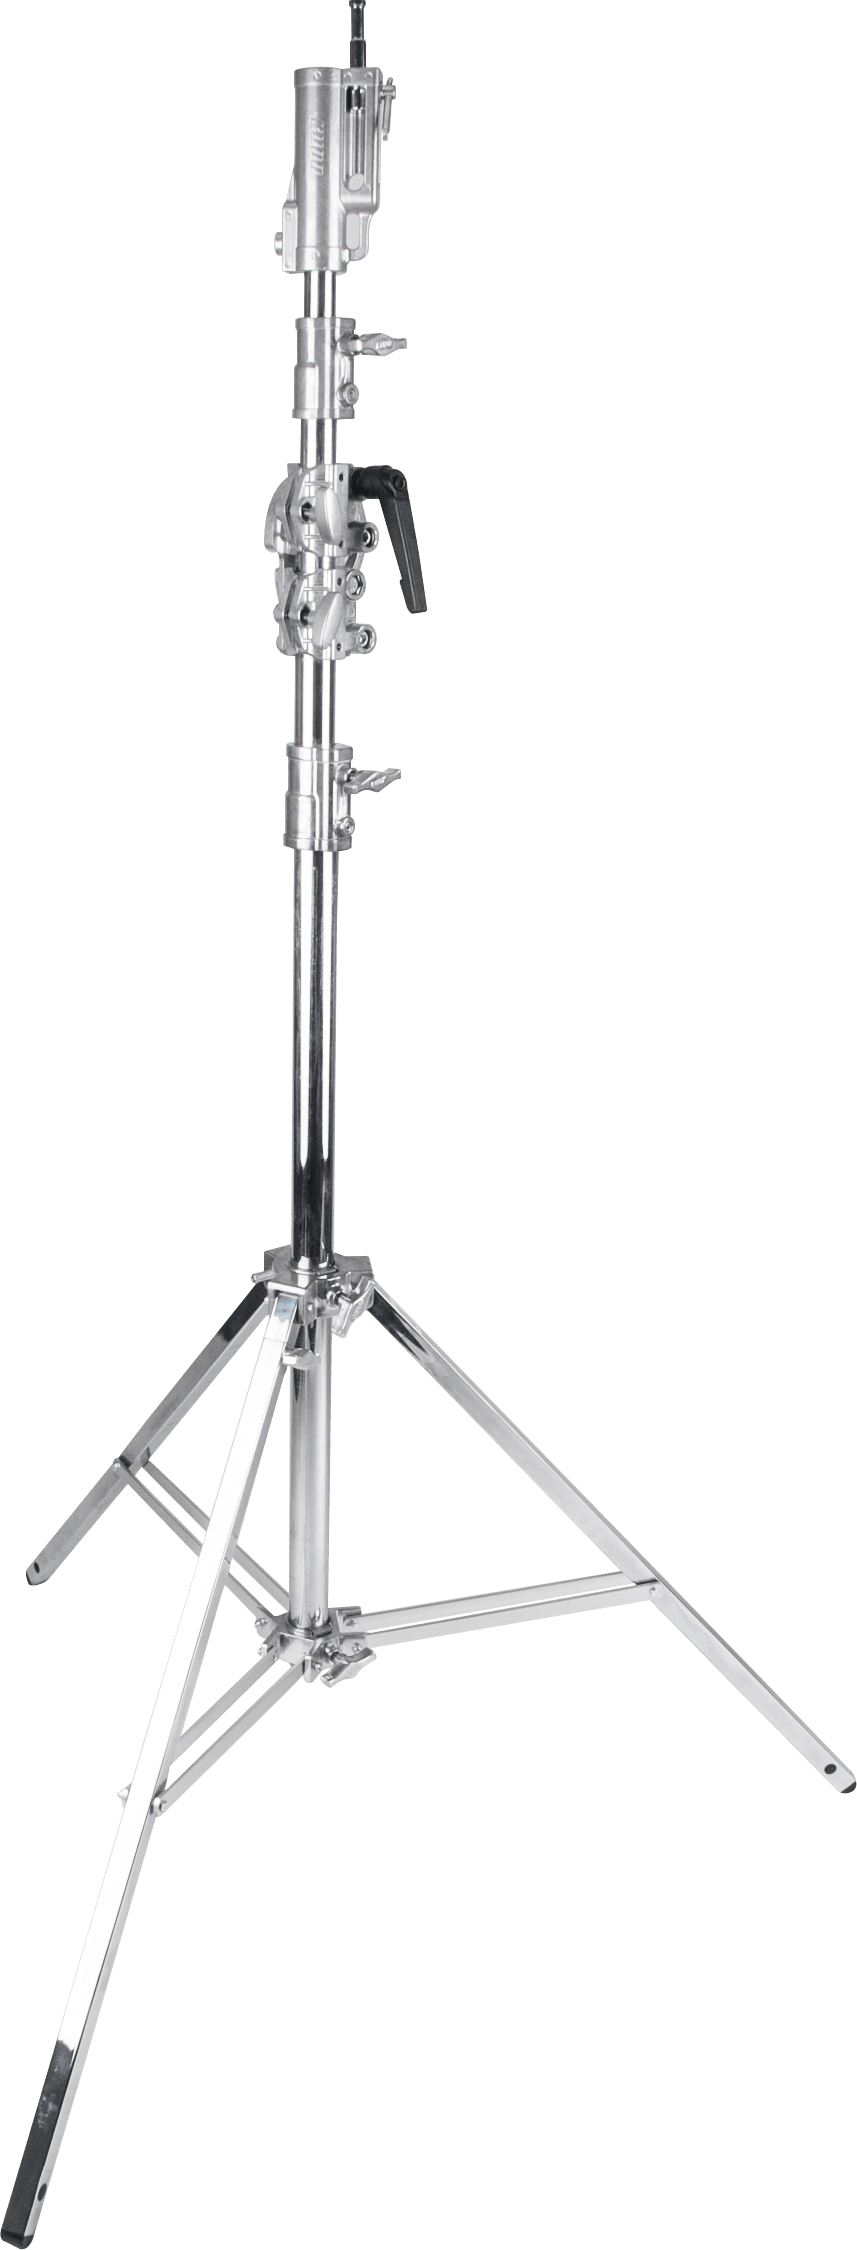 KUPO 546M K Stand-Junior Boom Stand with levelling leg